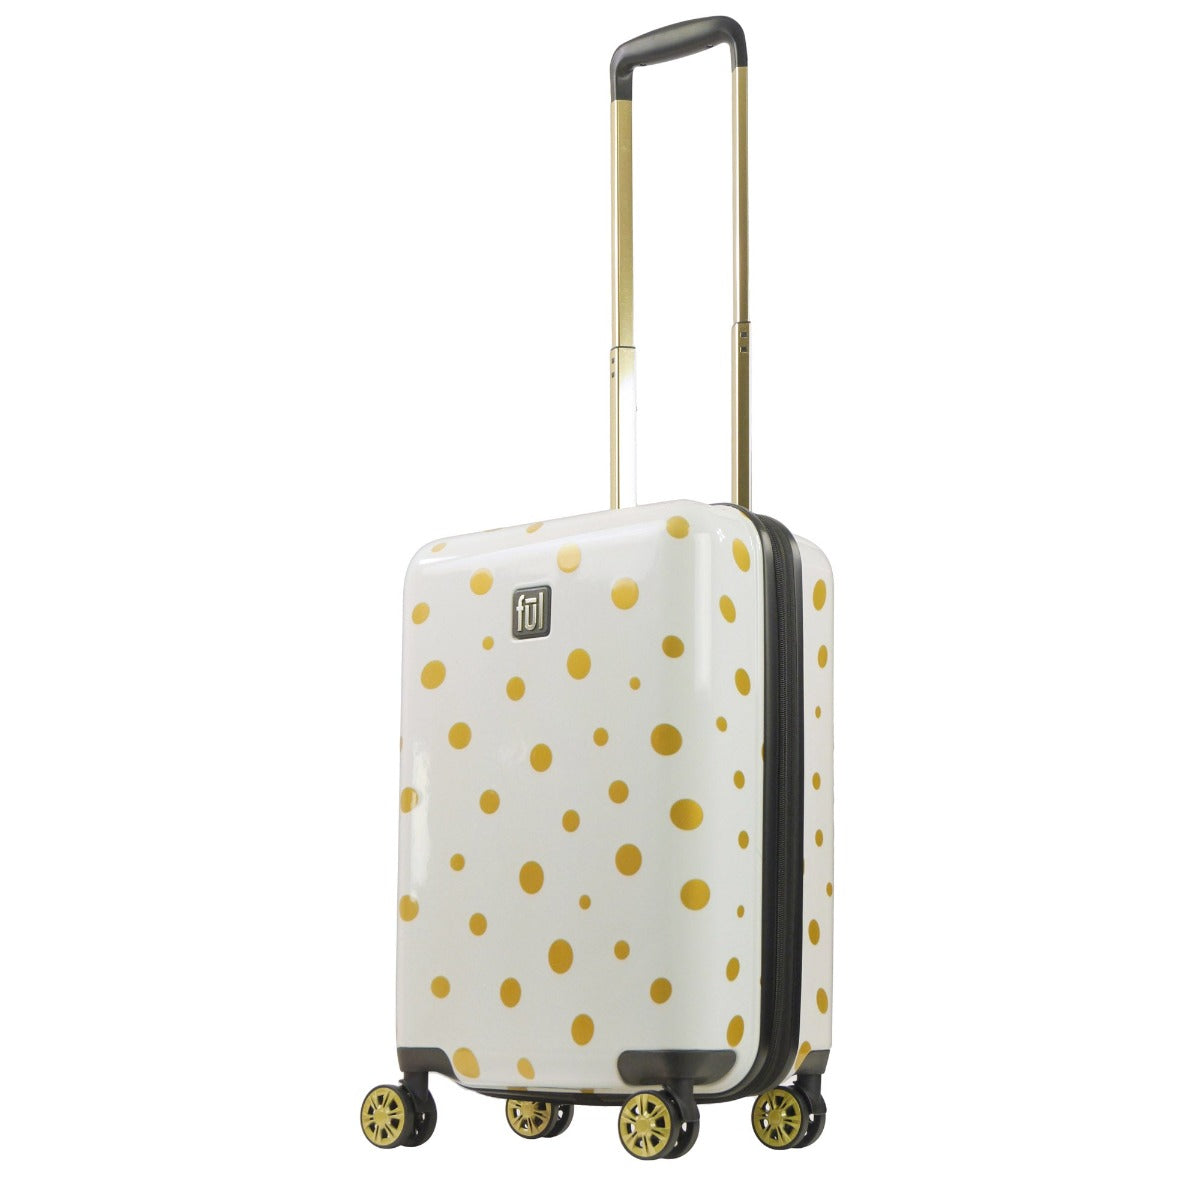 Ful Impulse Mixed Dots Hardside Spinner 22" Carry-on Luggage White Gold Suitcase